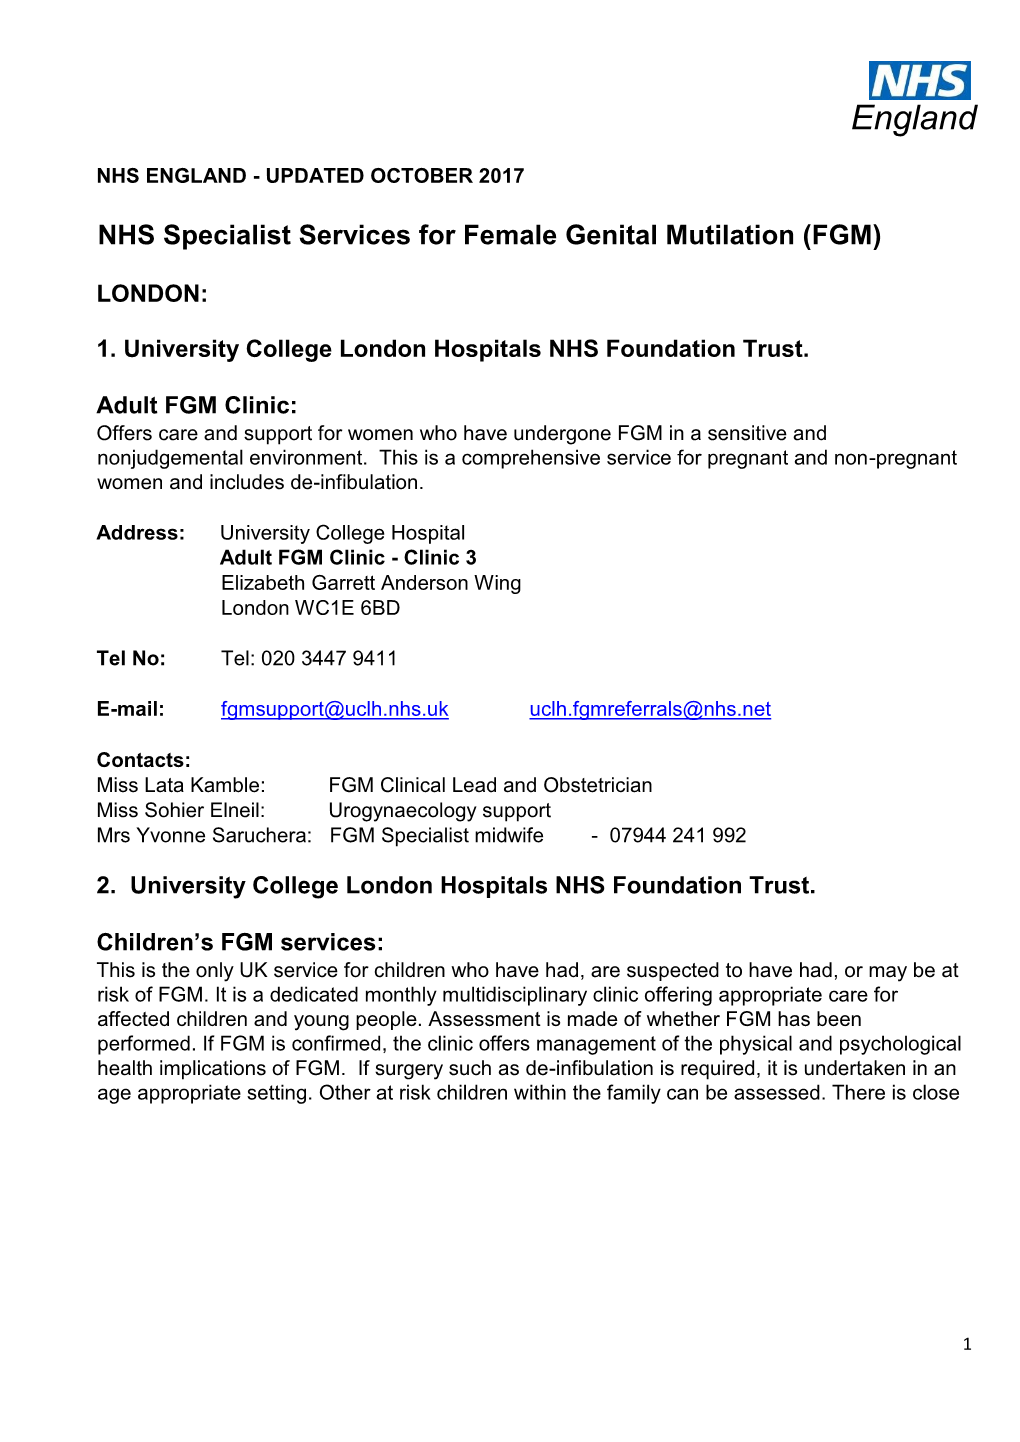 NHS Specialist Services for Female Genital Mutilation (FGM)